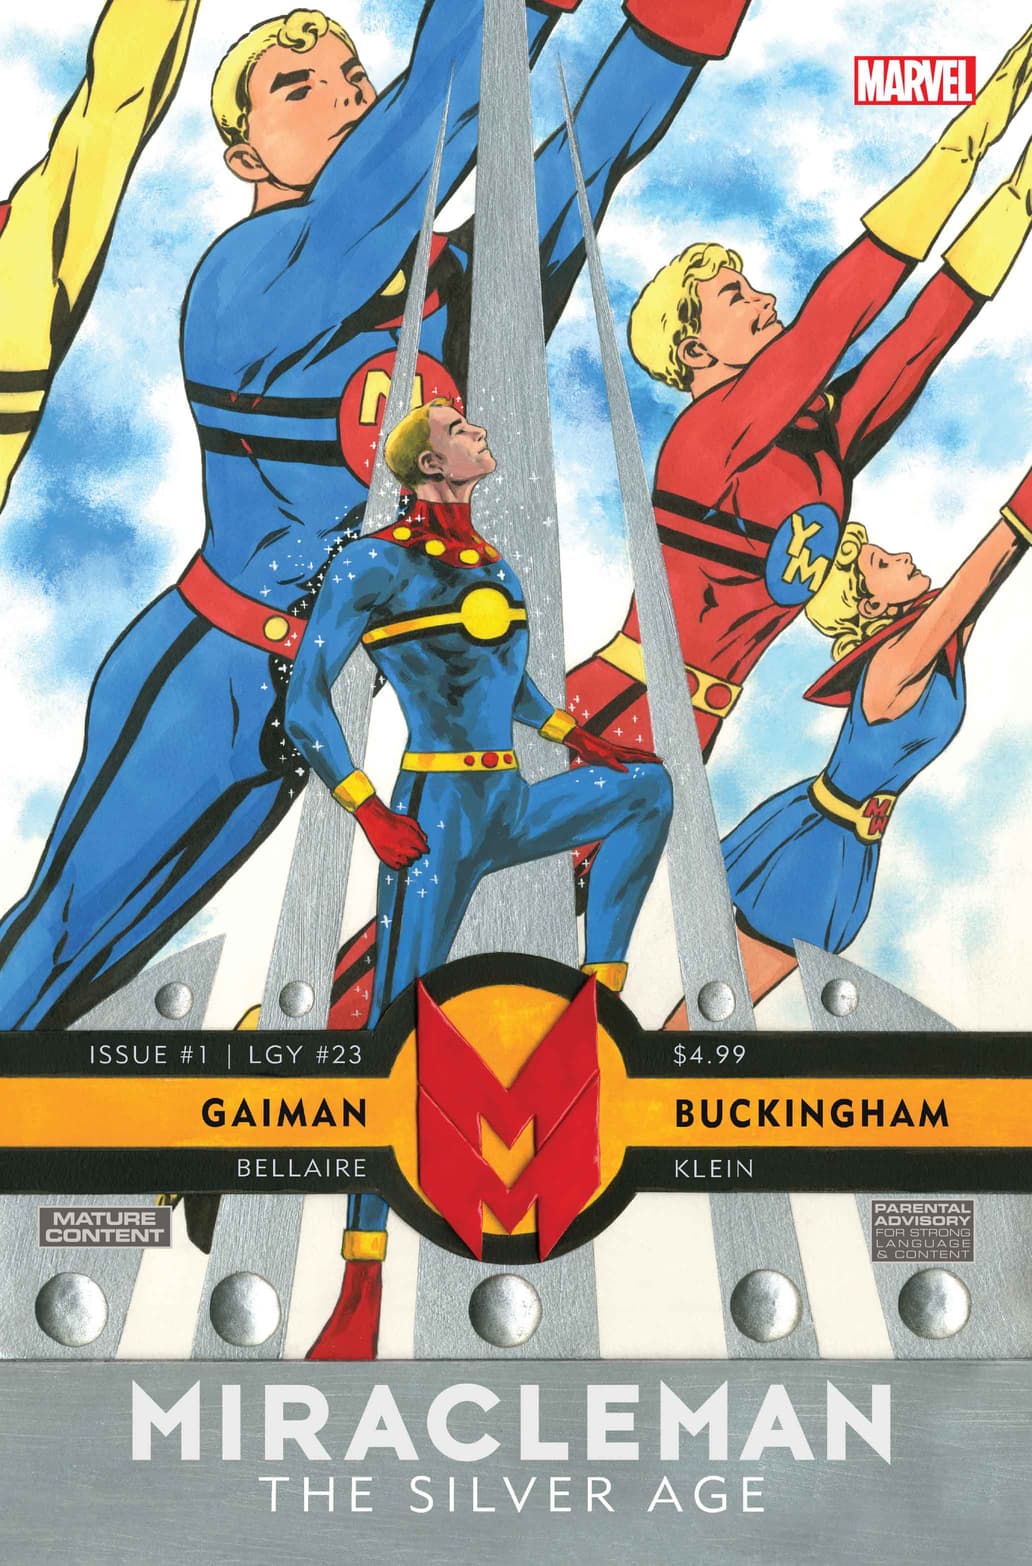 Miracleman: The Silver Age #1 Cover by Mark Buckingham